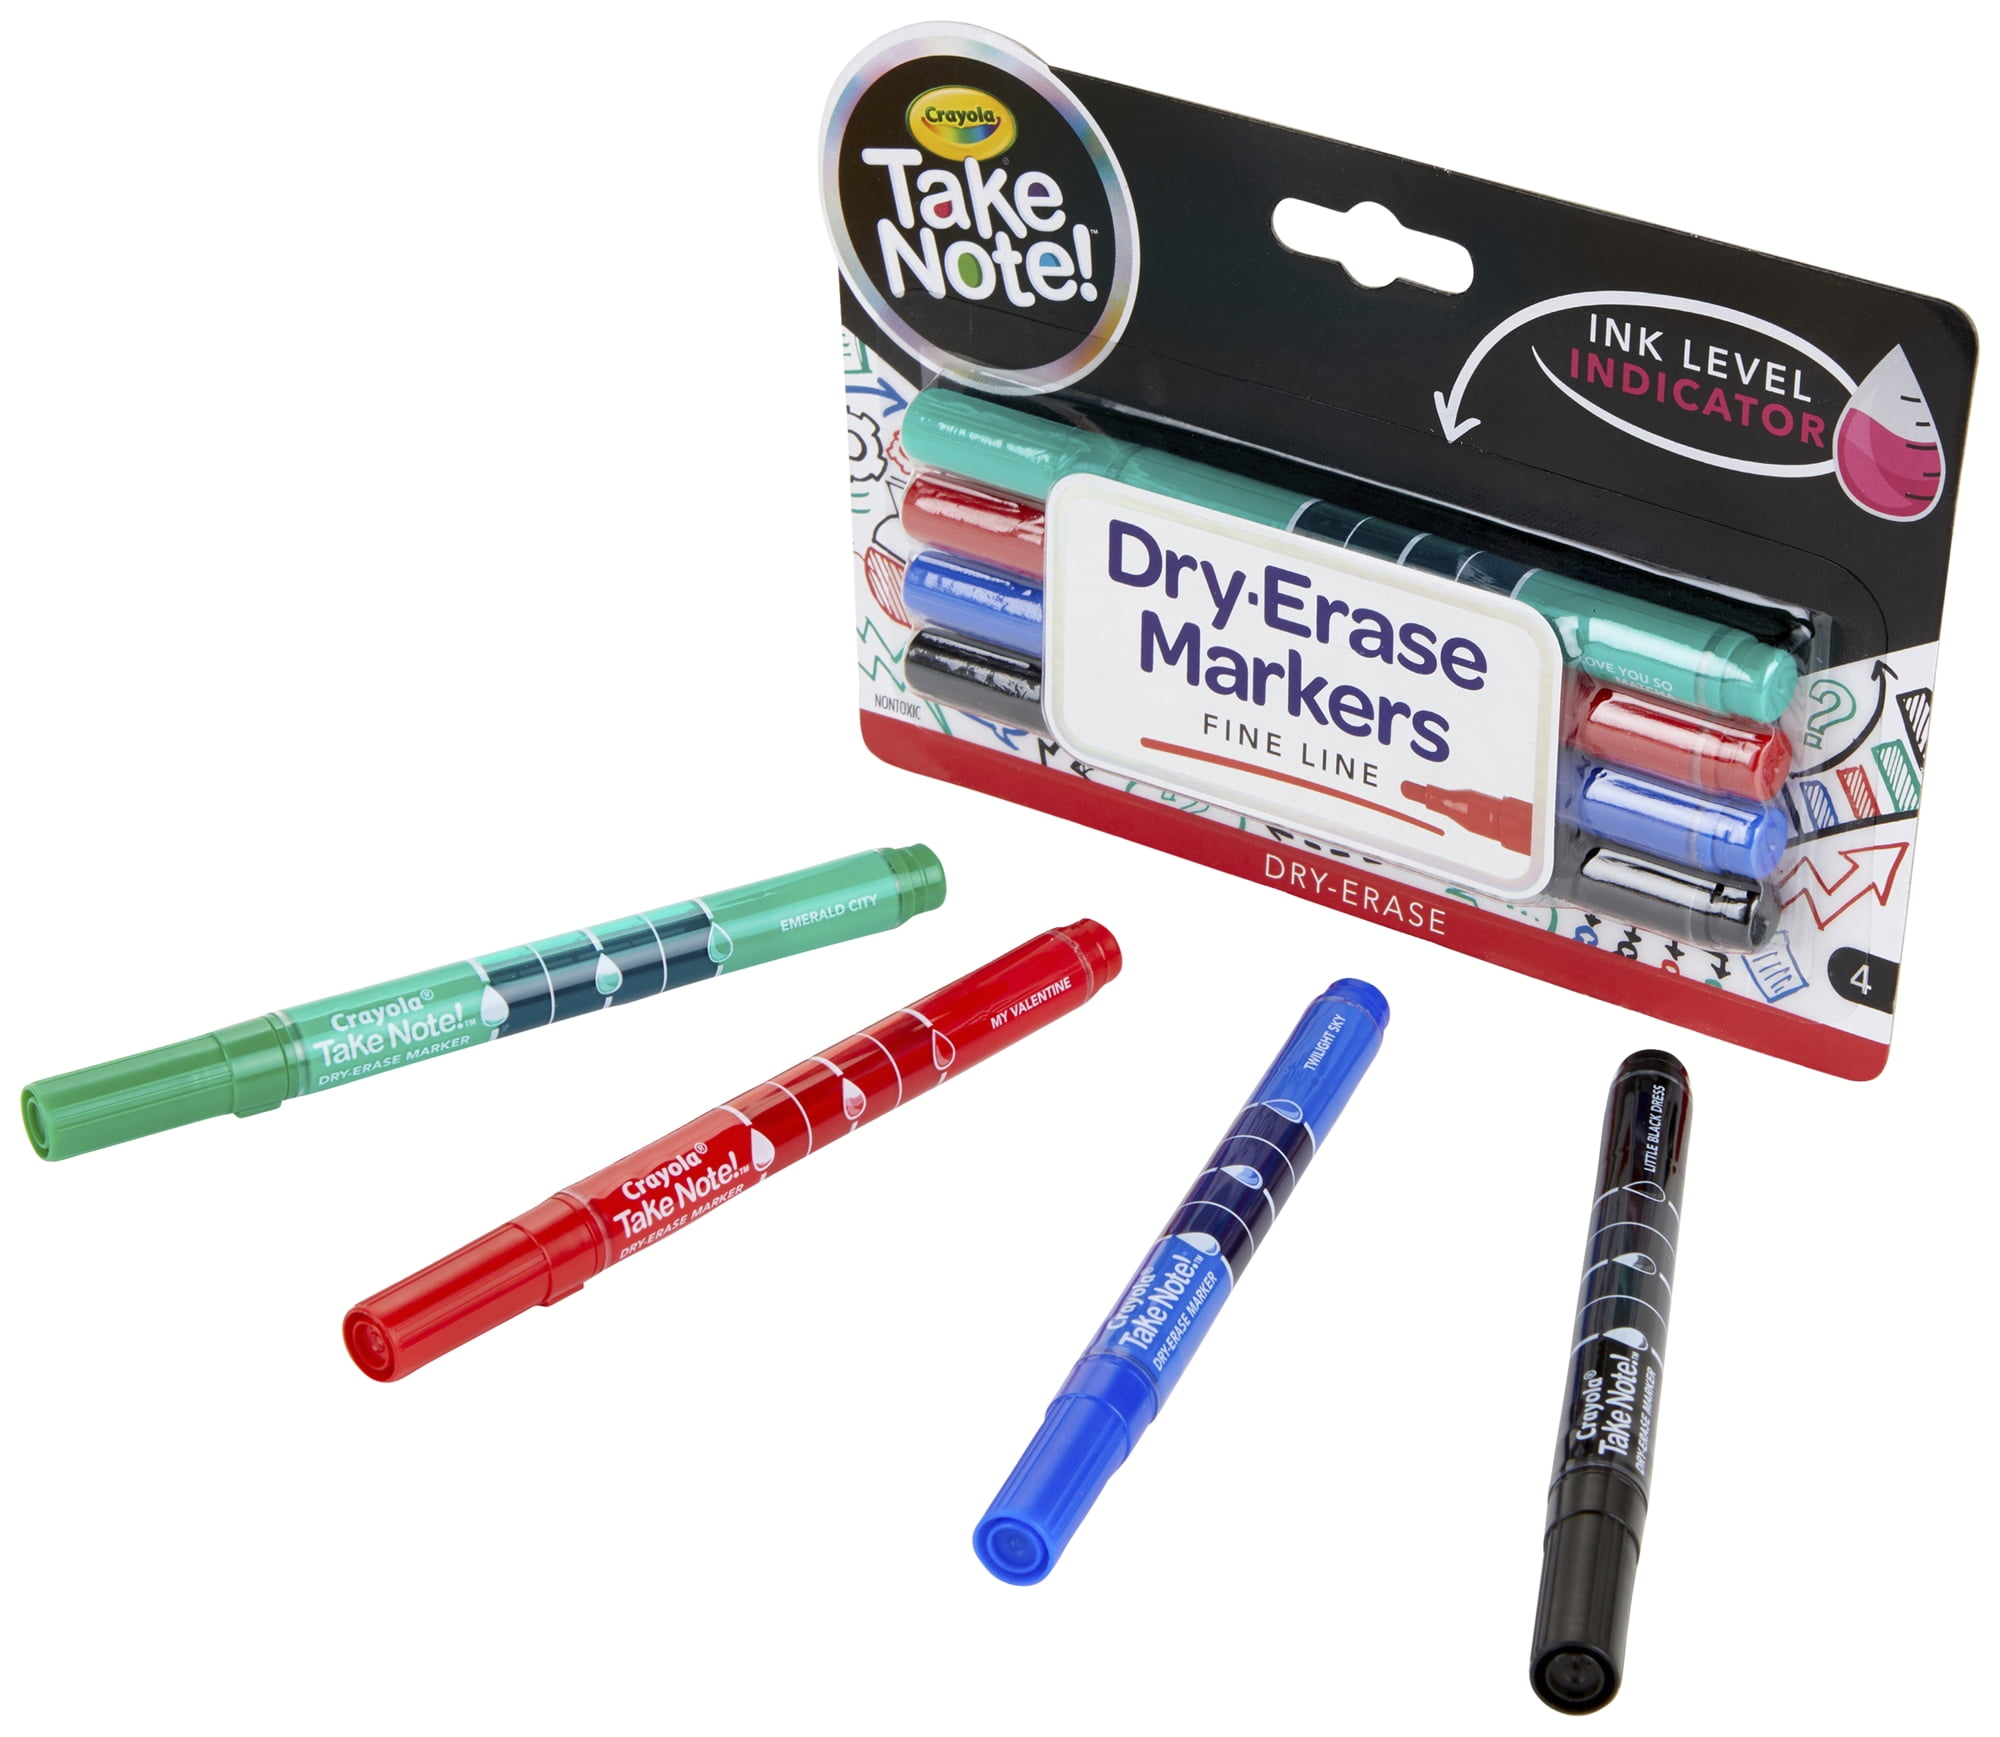 Lot of 2 Crayola Take Note! Dry Erase Markers Bullet Tip Assorted